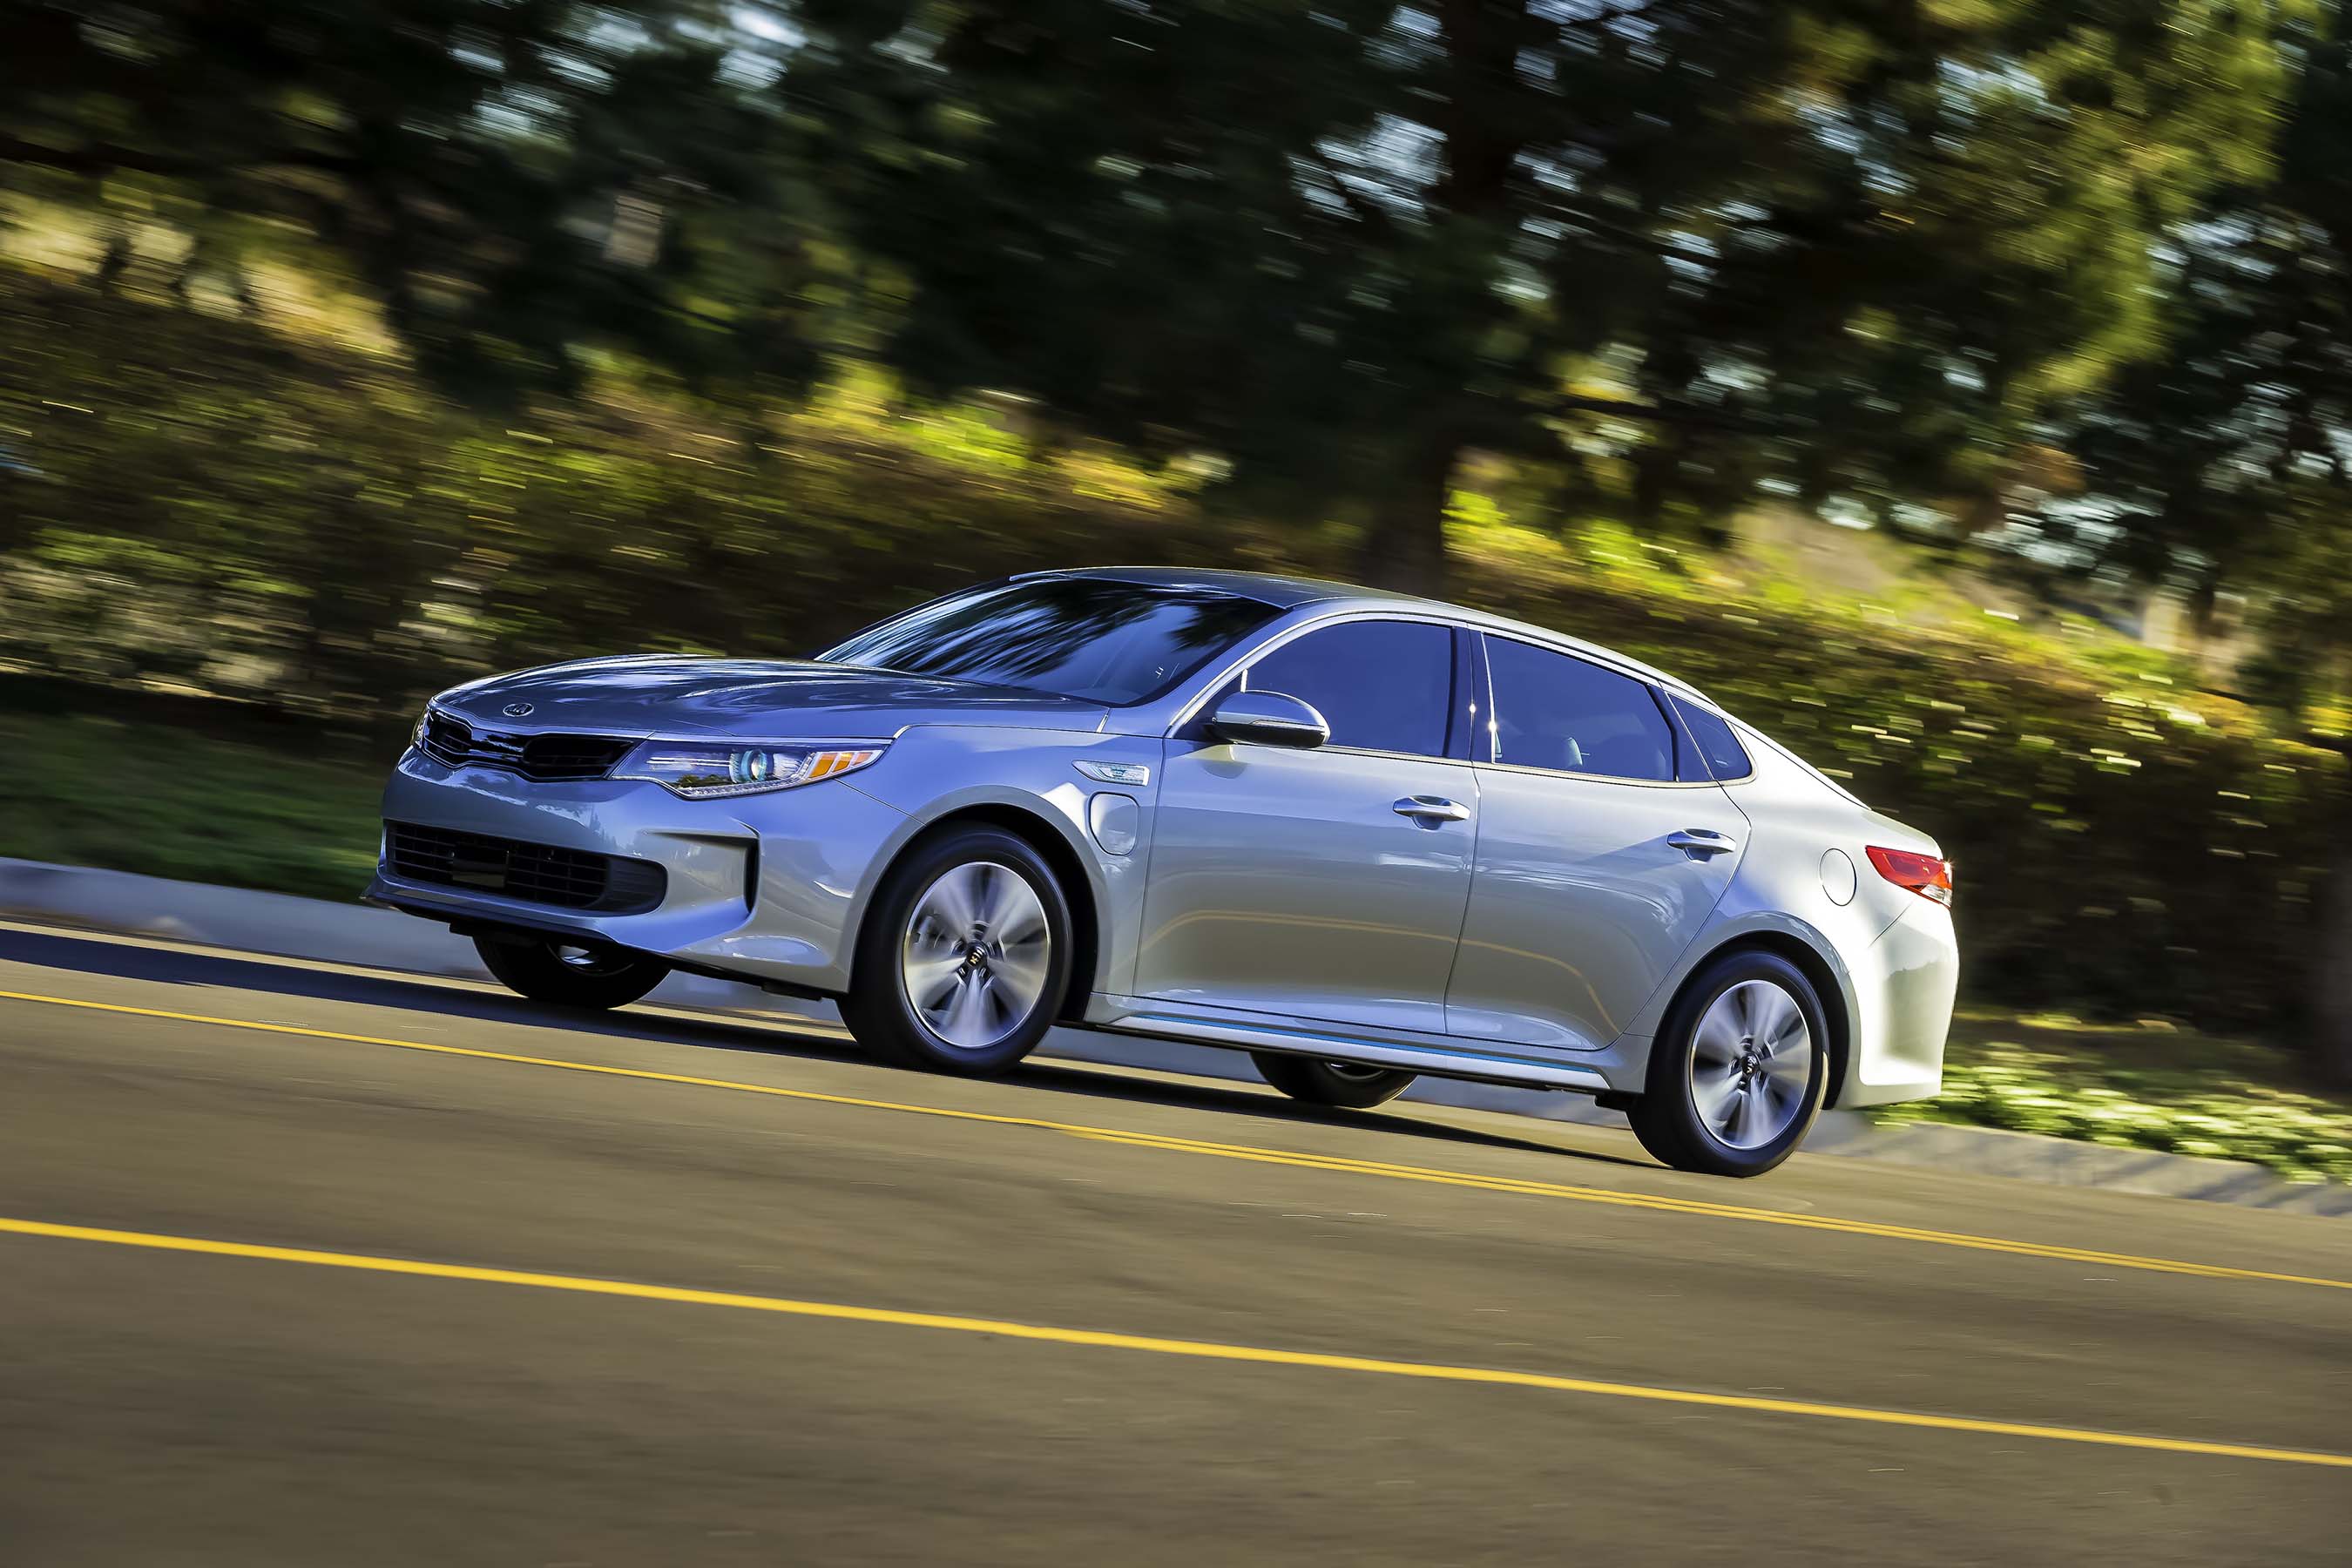 Kia Optima PHEV includes a powerful hybrid engine, robust telematics system, and exterior design enhancements; all combine to deliver a superior hybrid driving experience.